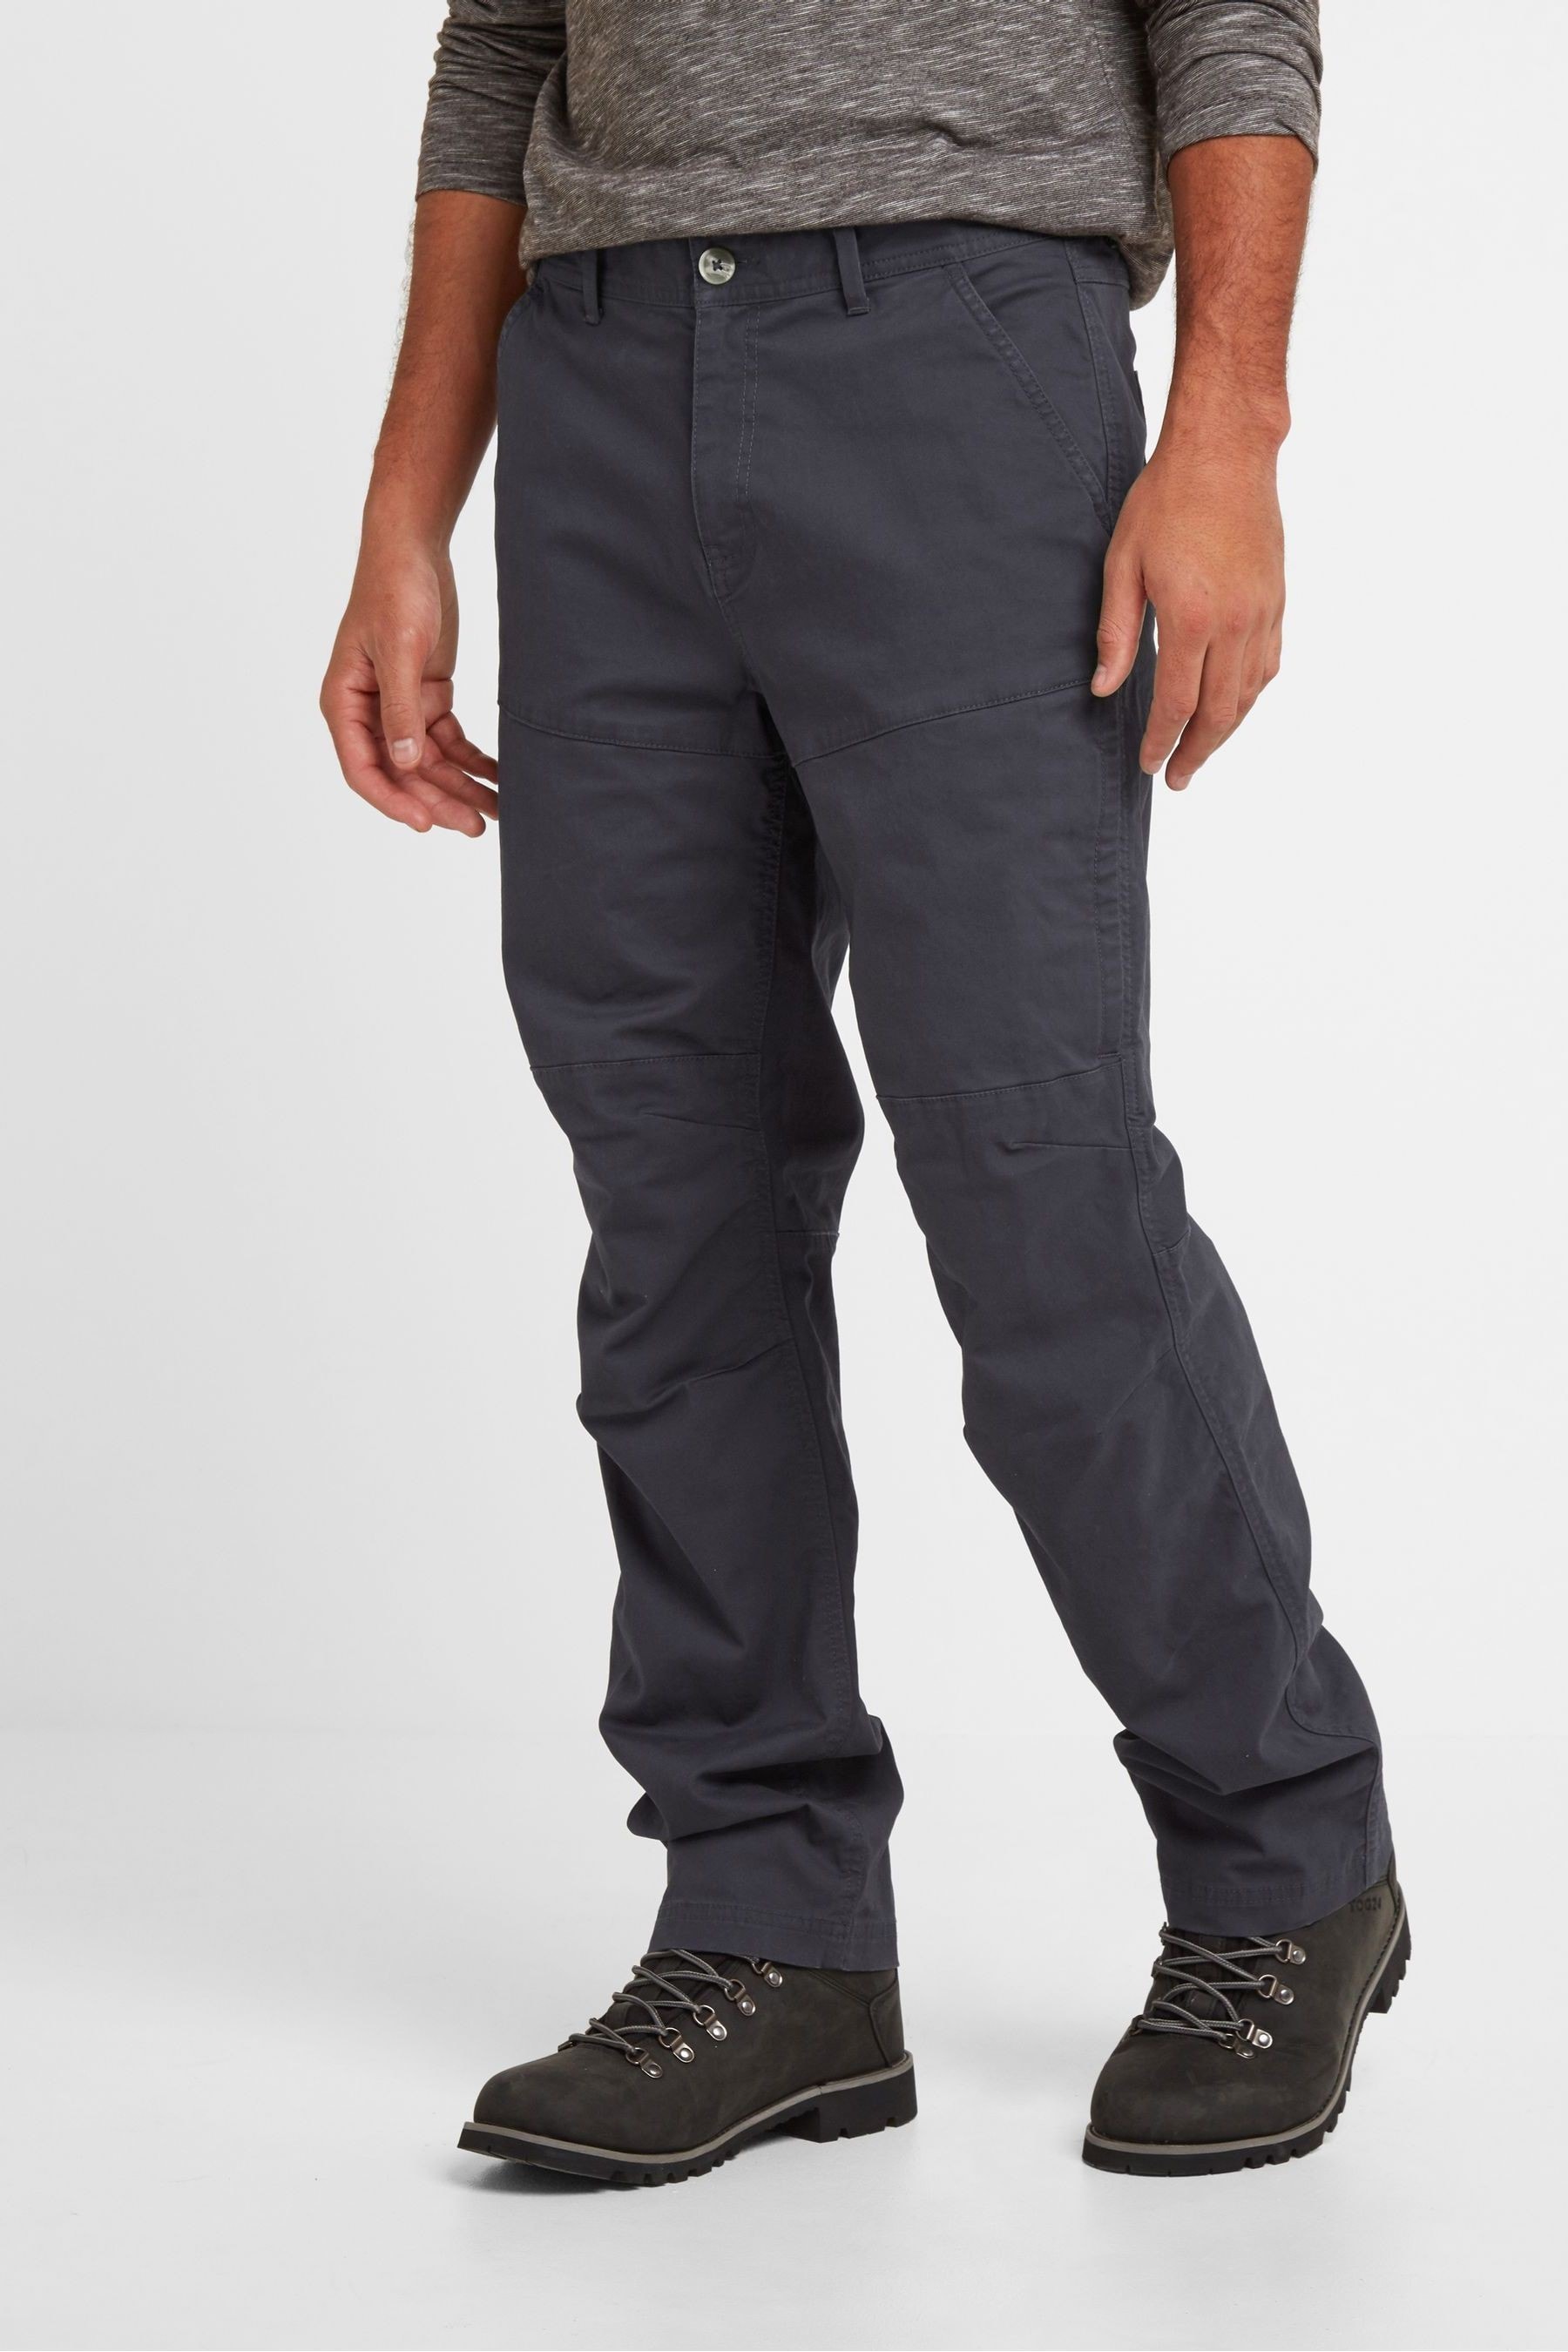 Buy Tog 24 Reighton Mens Tech Long Walking Trousers from Next Ireland